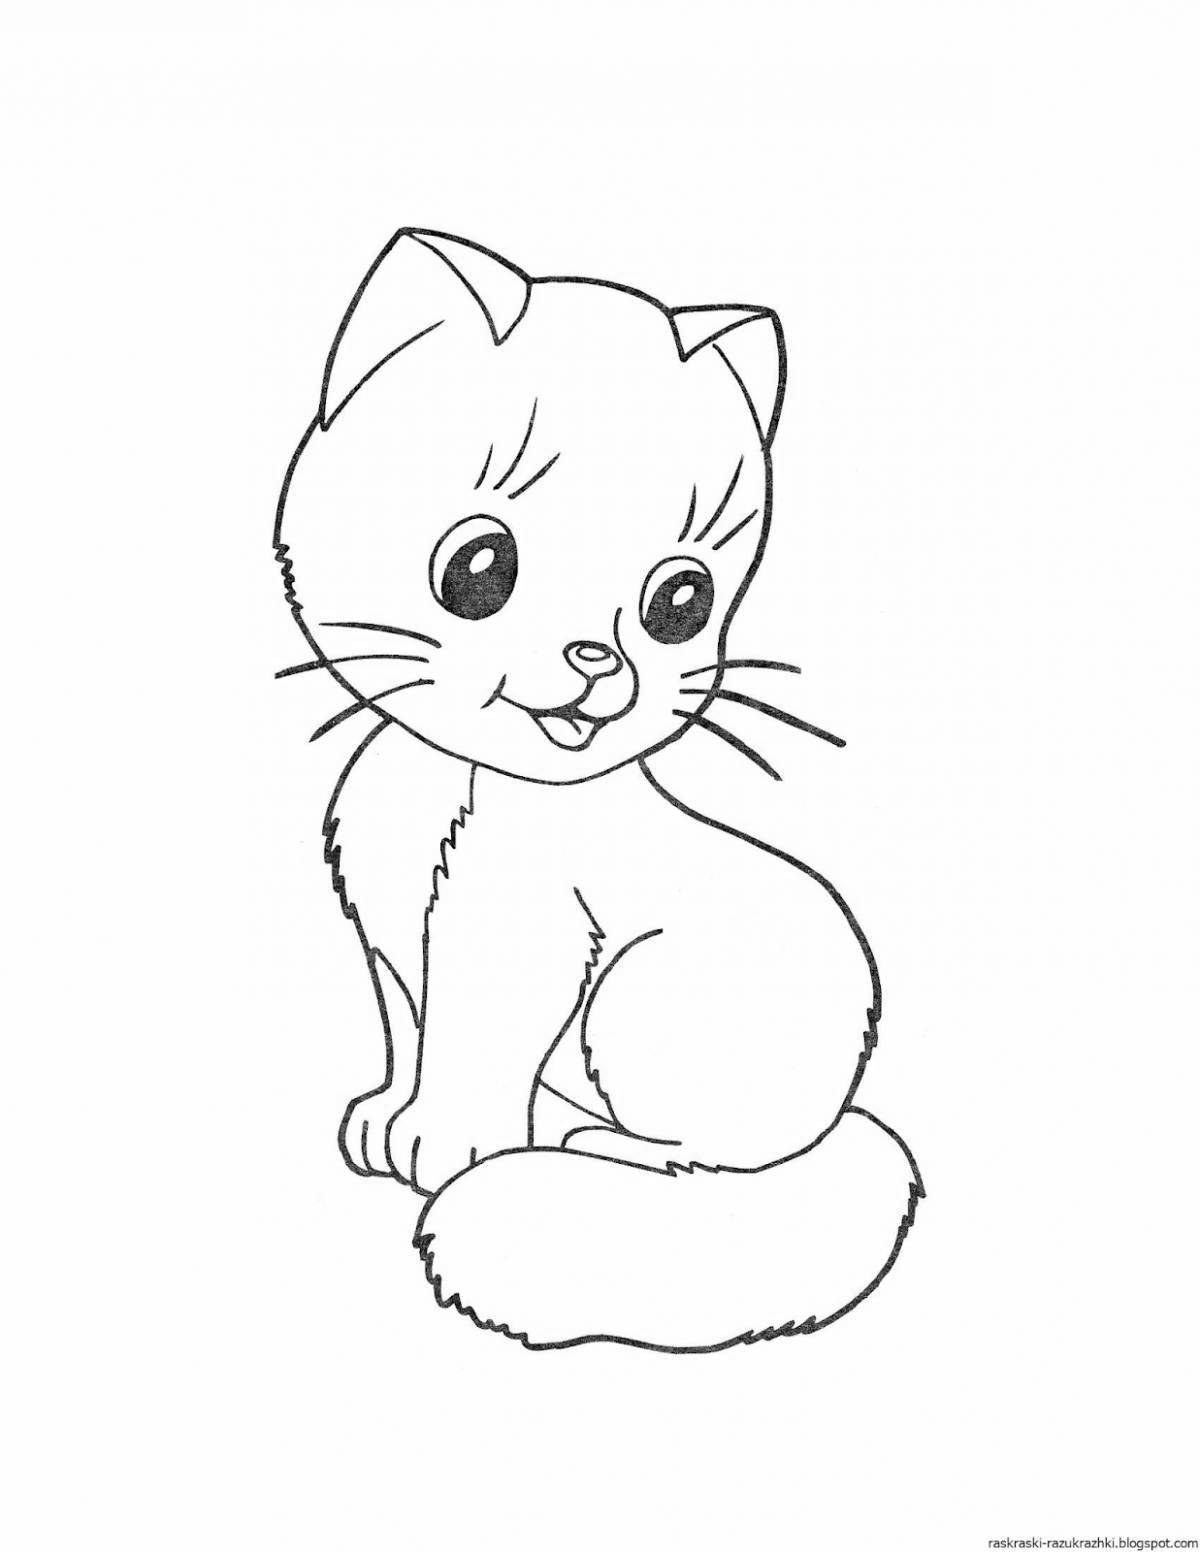 Majestic coloring page drawing of a cat